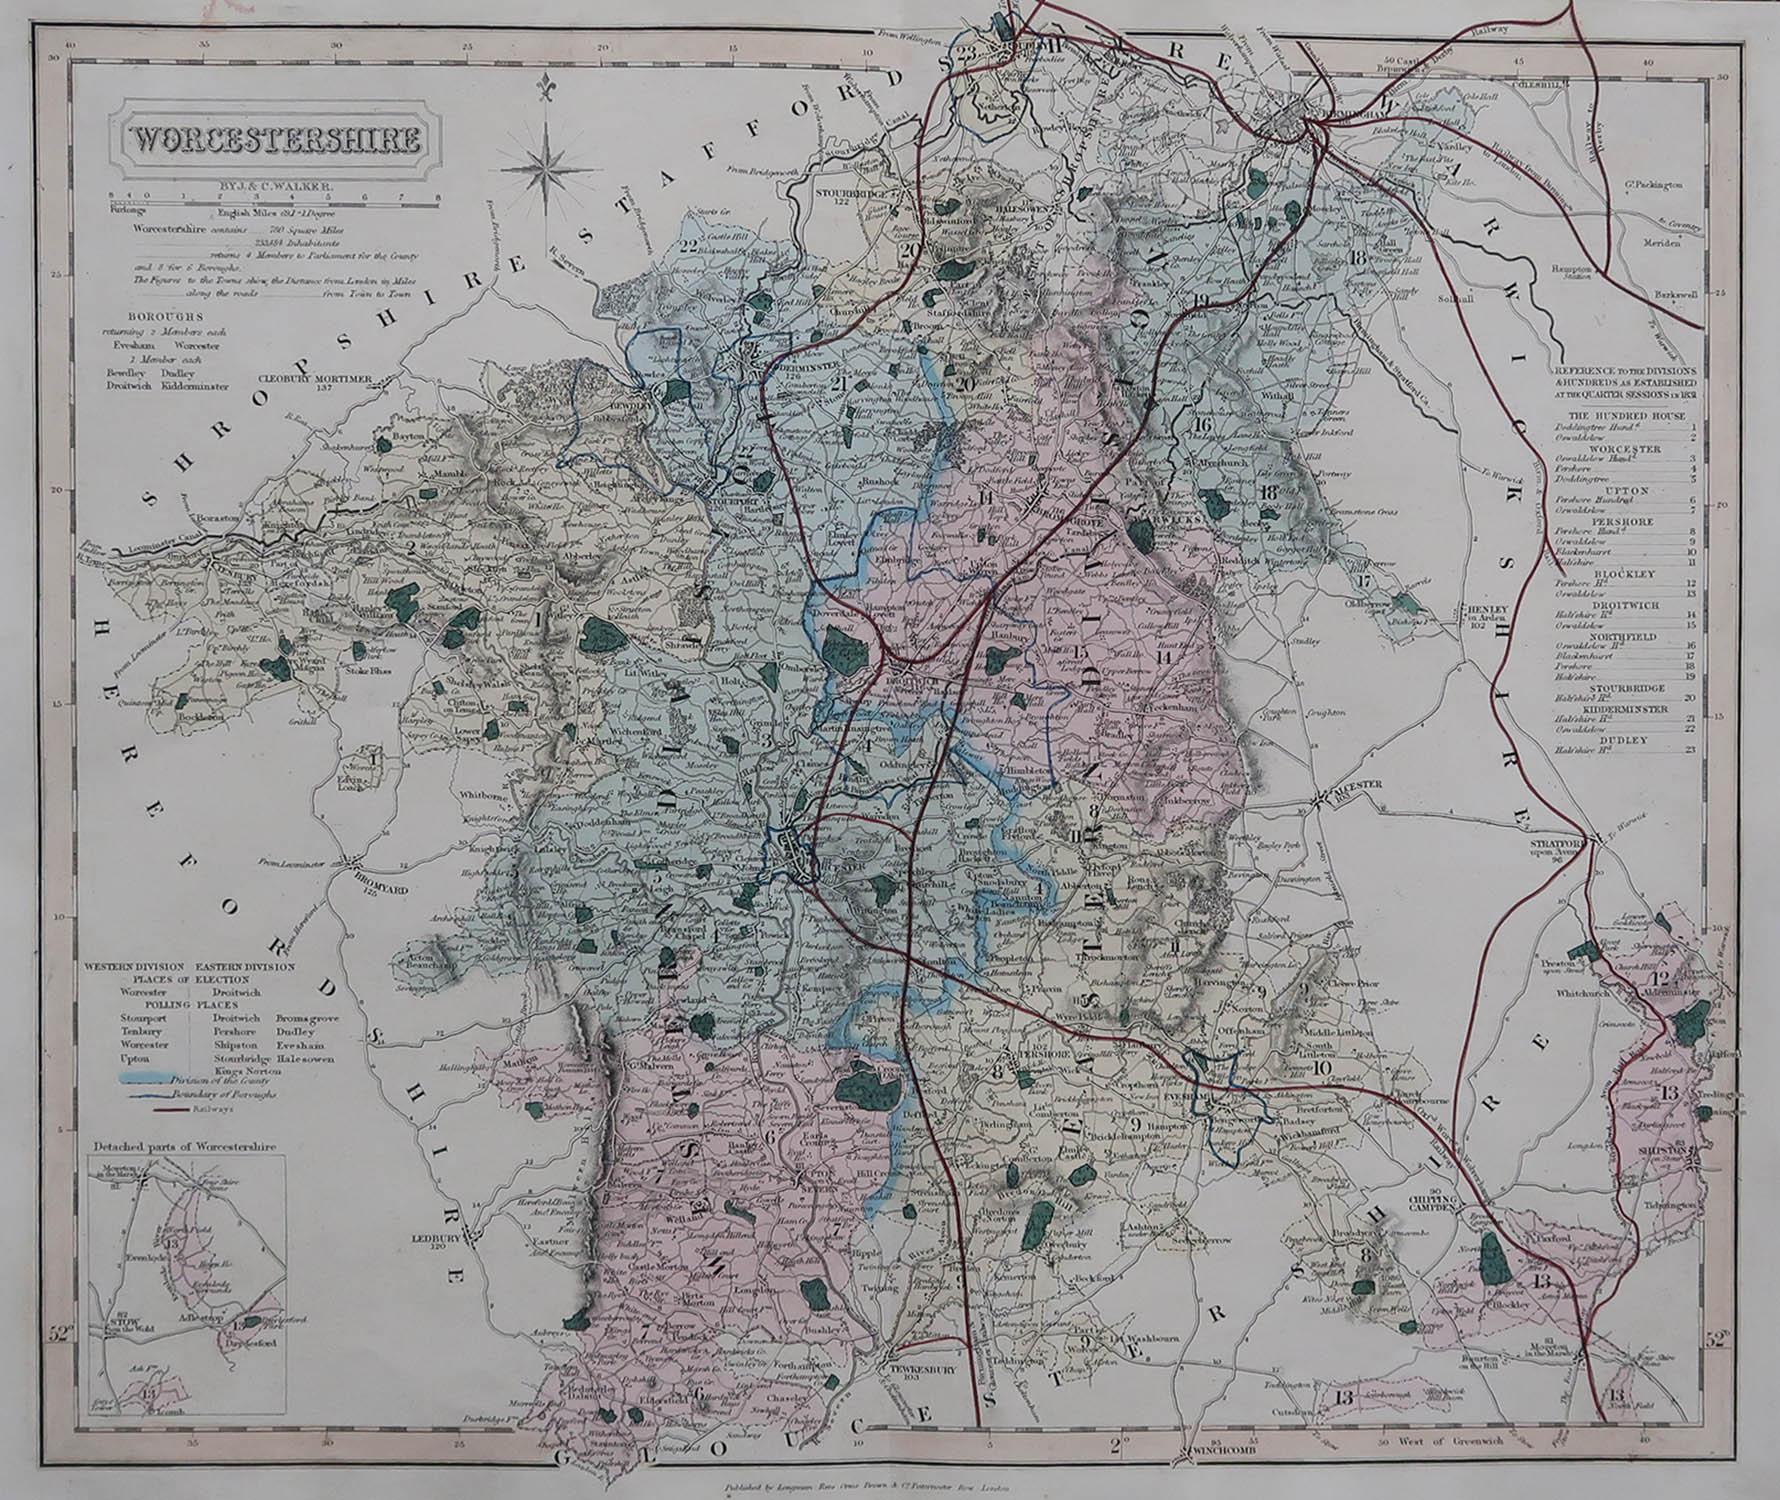 Great map of Worcestershire

Original colour

By J & C Walker

Published by Longman, Rees, Orme, Brown & Co. 1851

Unframed.




